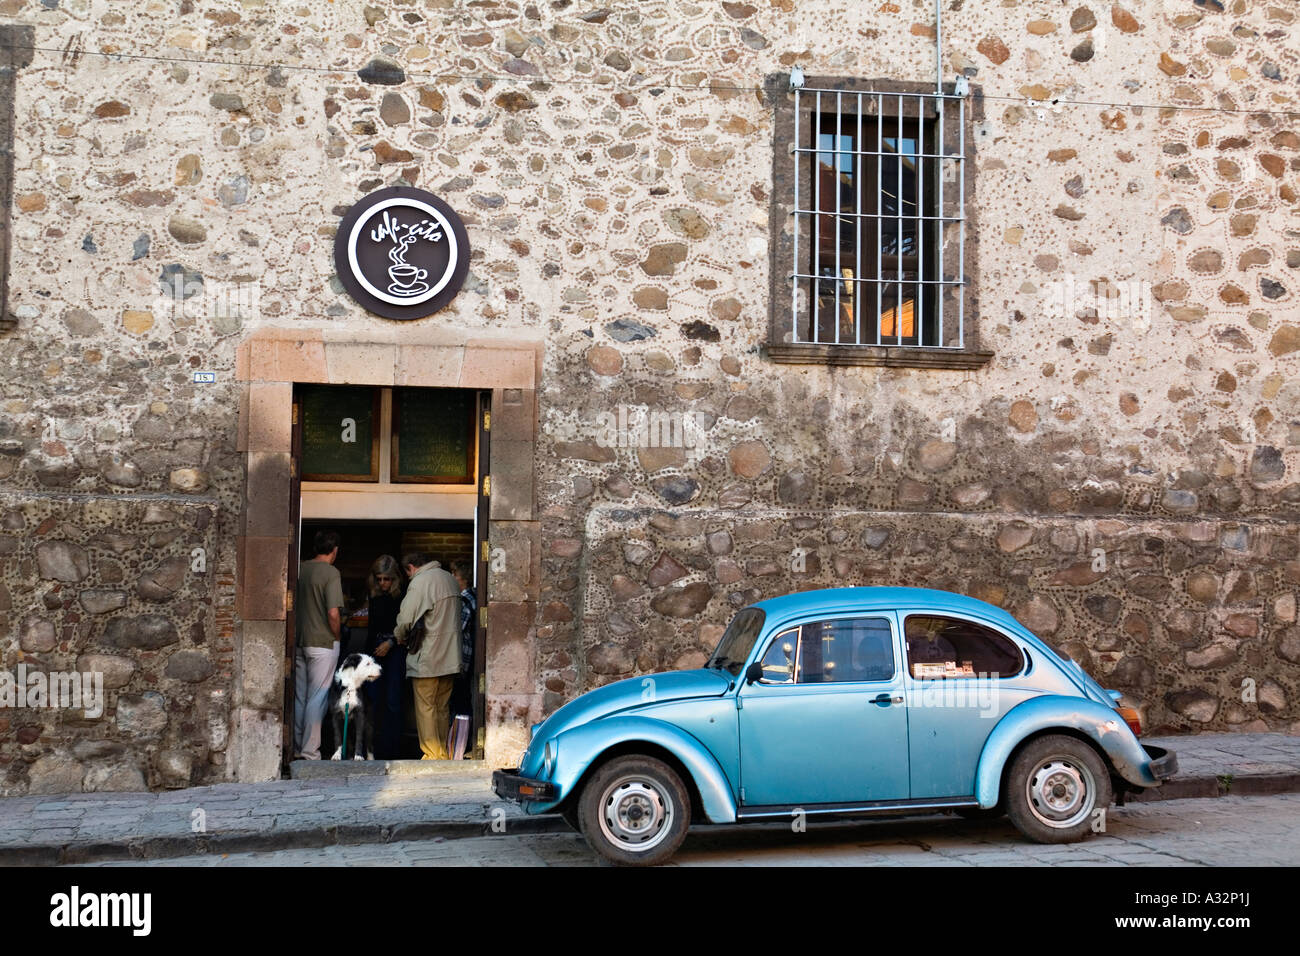 MEXICO San Miguel de Allende Blue Volkswagen beetle car parked on street coffee shop people and dog stand in doorway to store Stock Photo